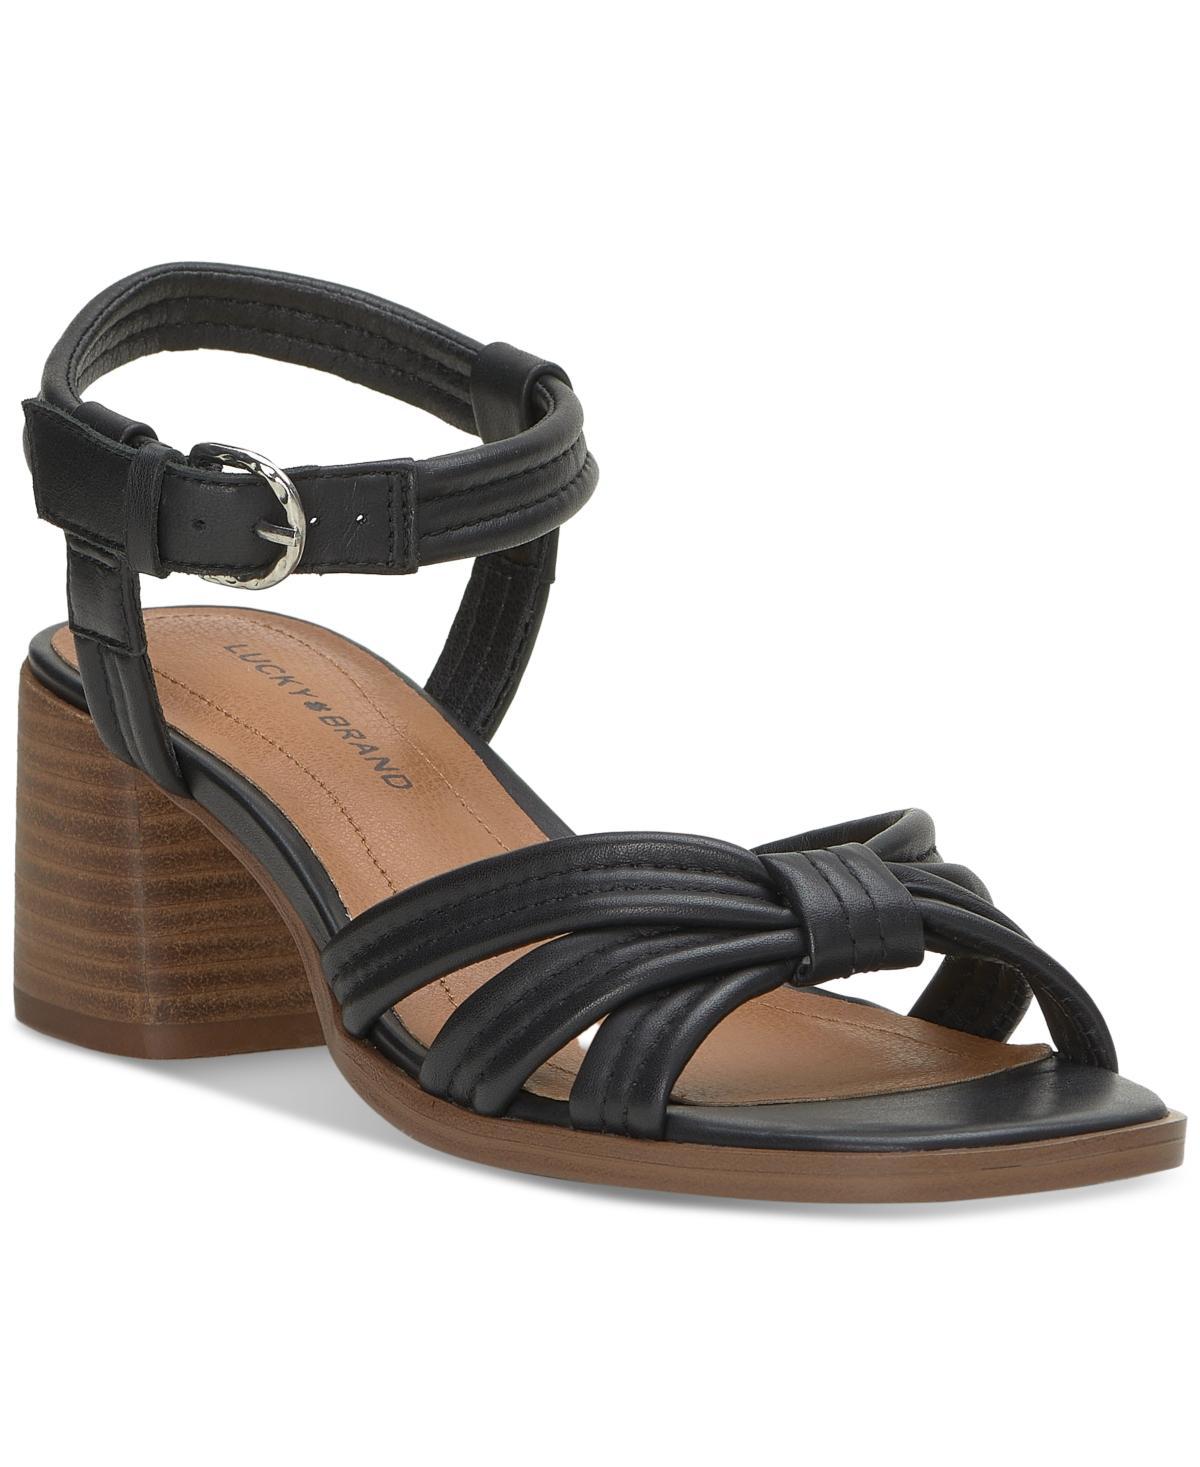 Lucky Brand Jolenne Ankle Strap Sandal Product Image